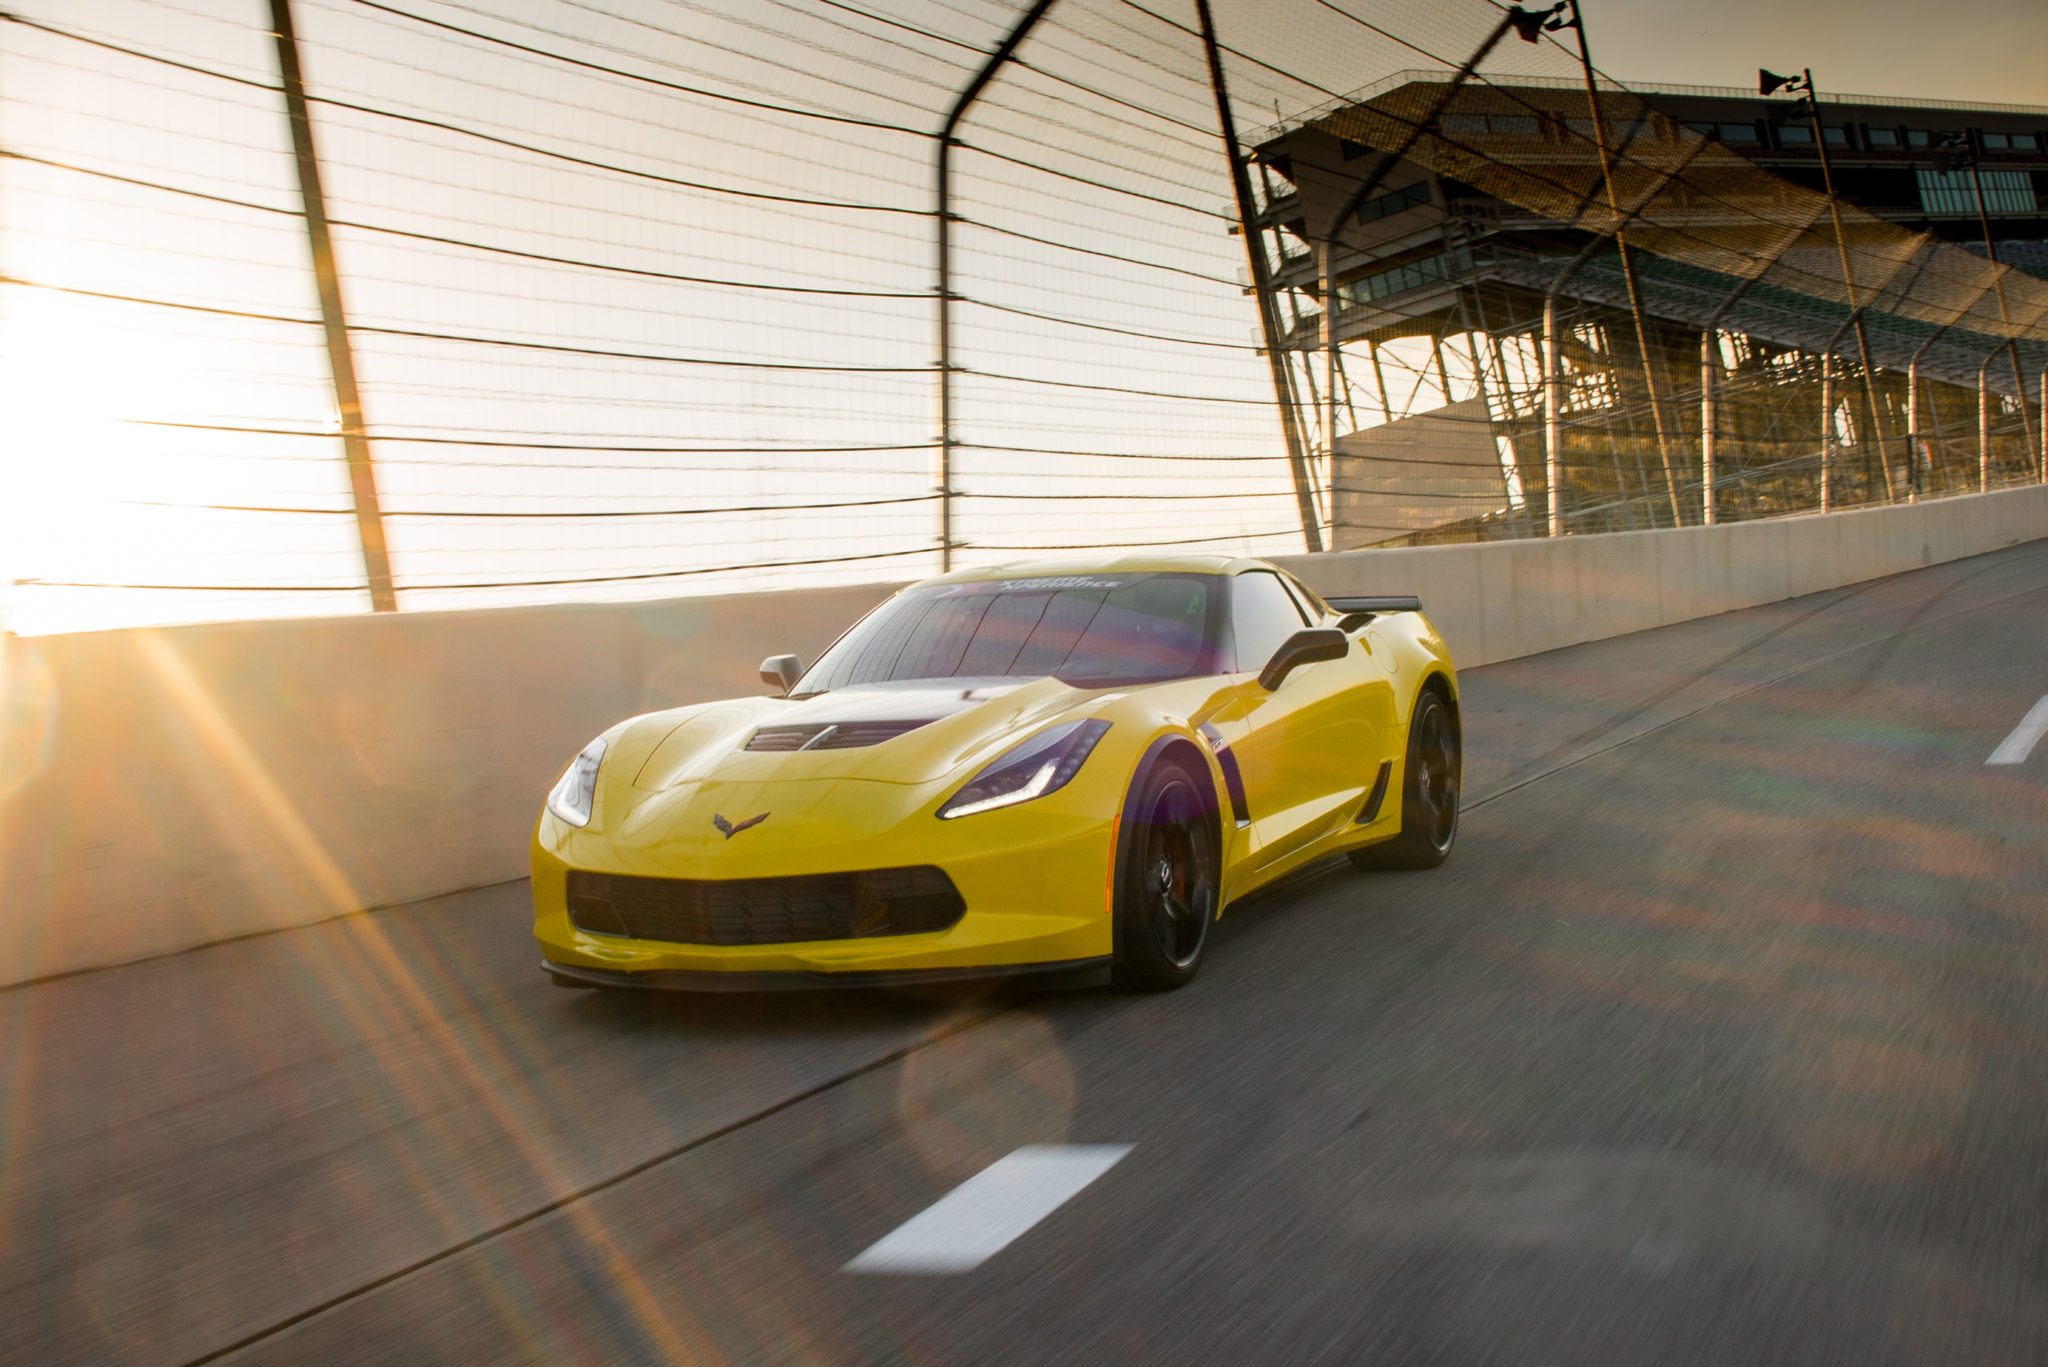 image of xtreme xperience chevy corvette z06 on the racetrack